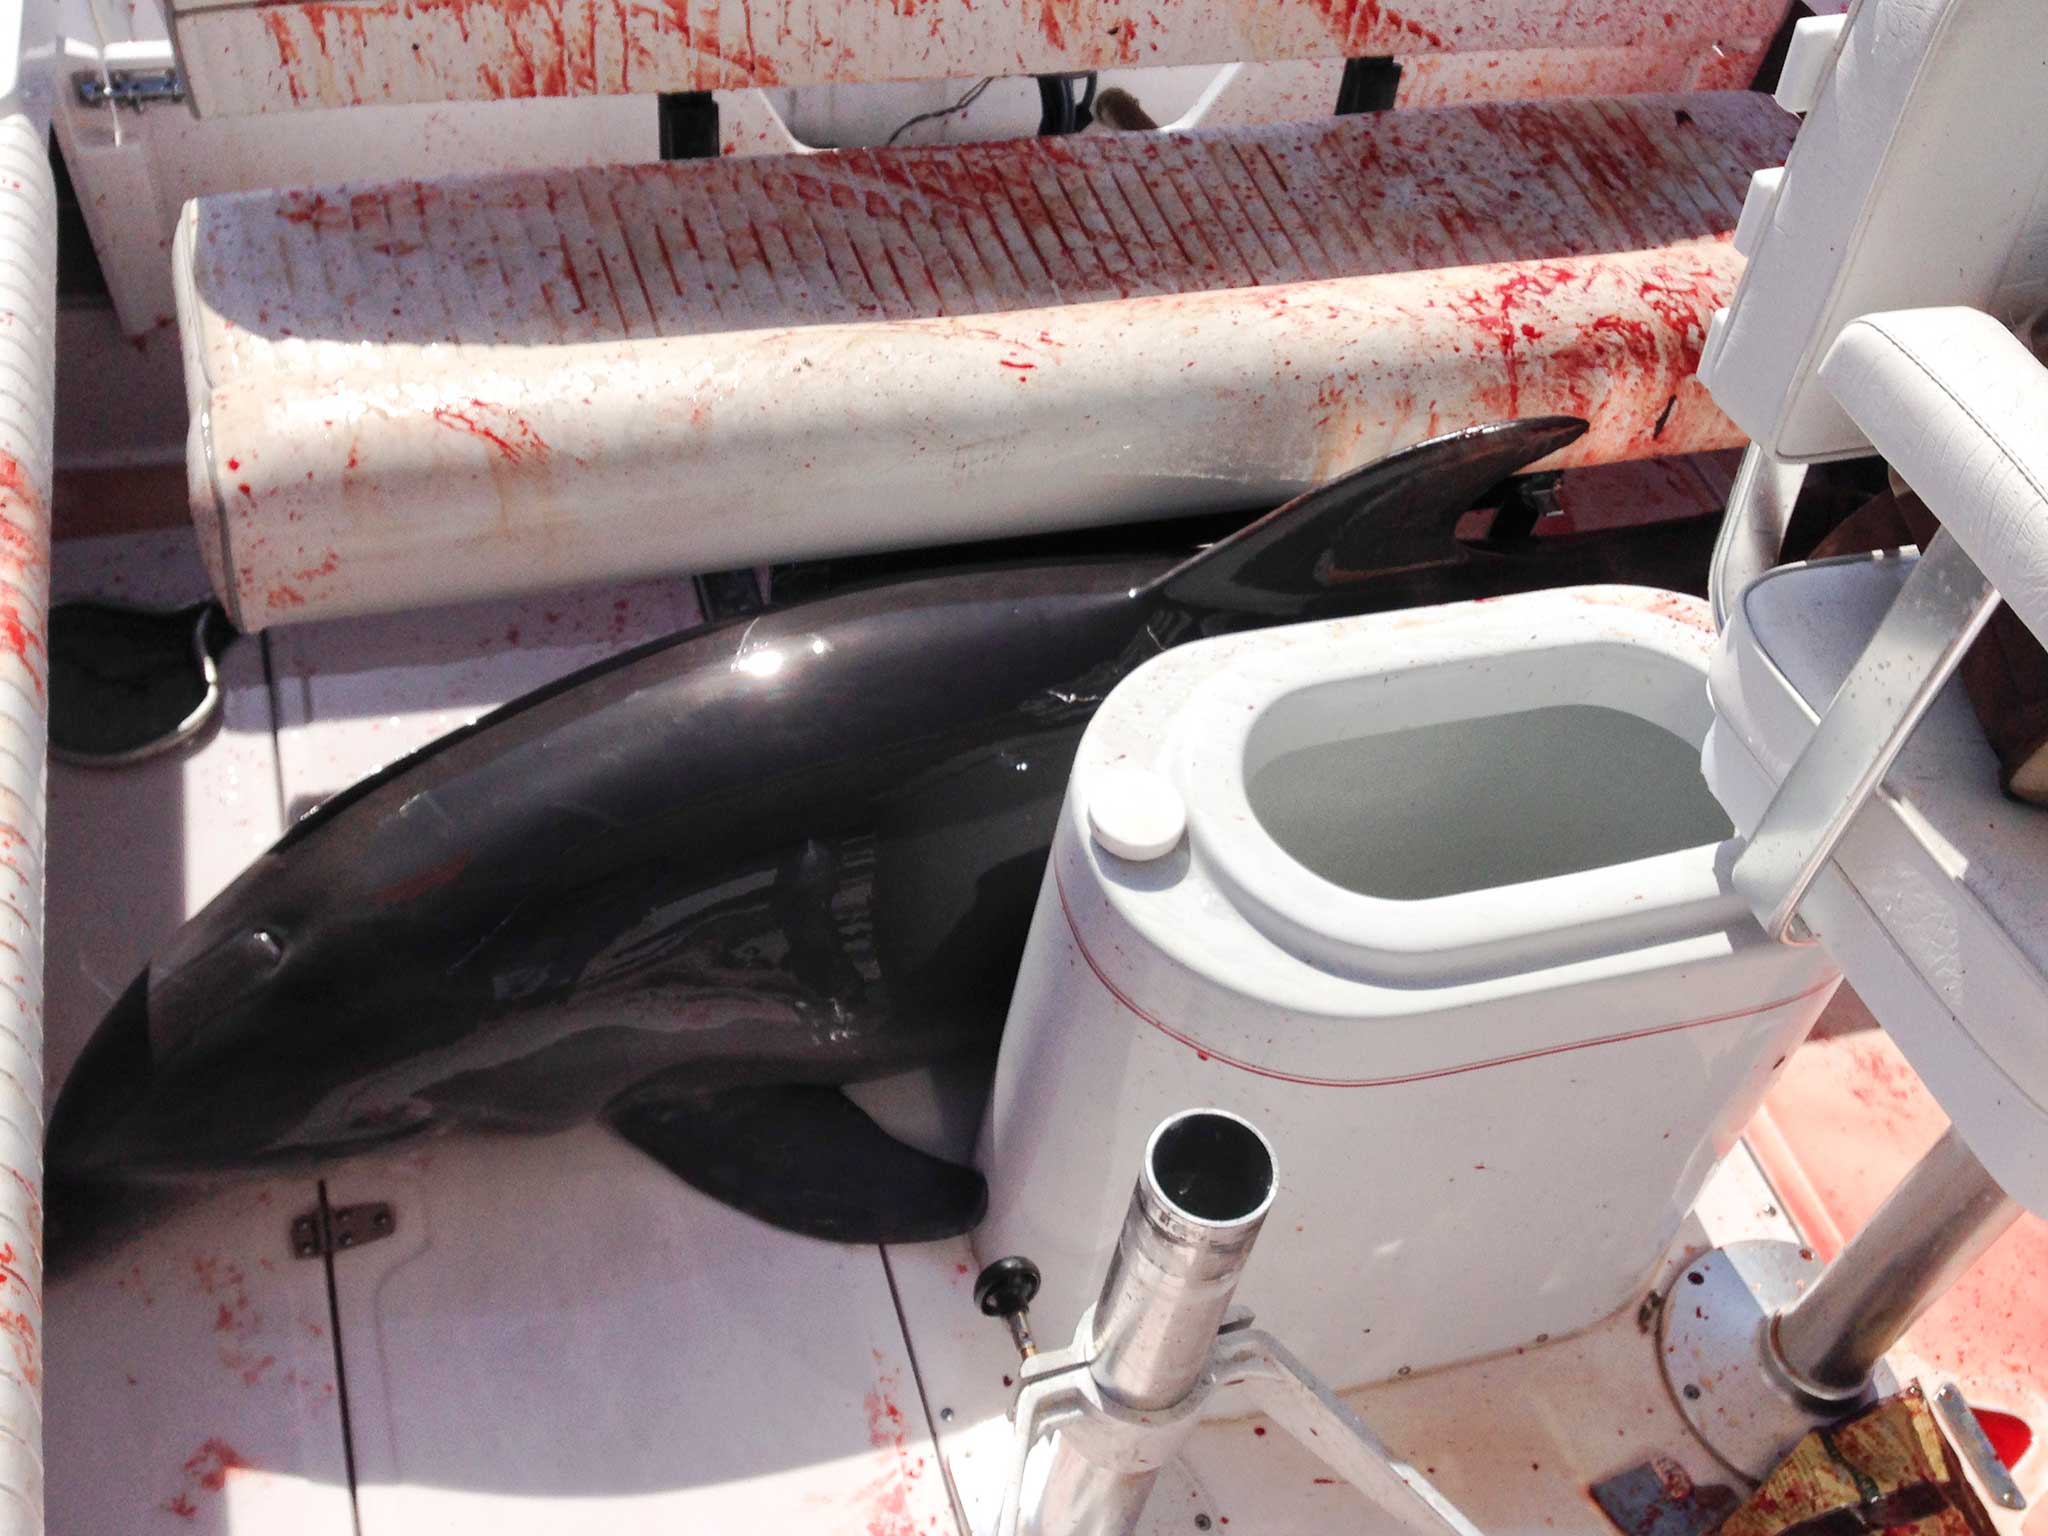 The dolphin - despite all the blood - was apparently released relatively unharmed